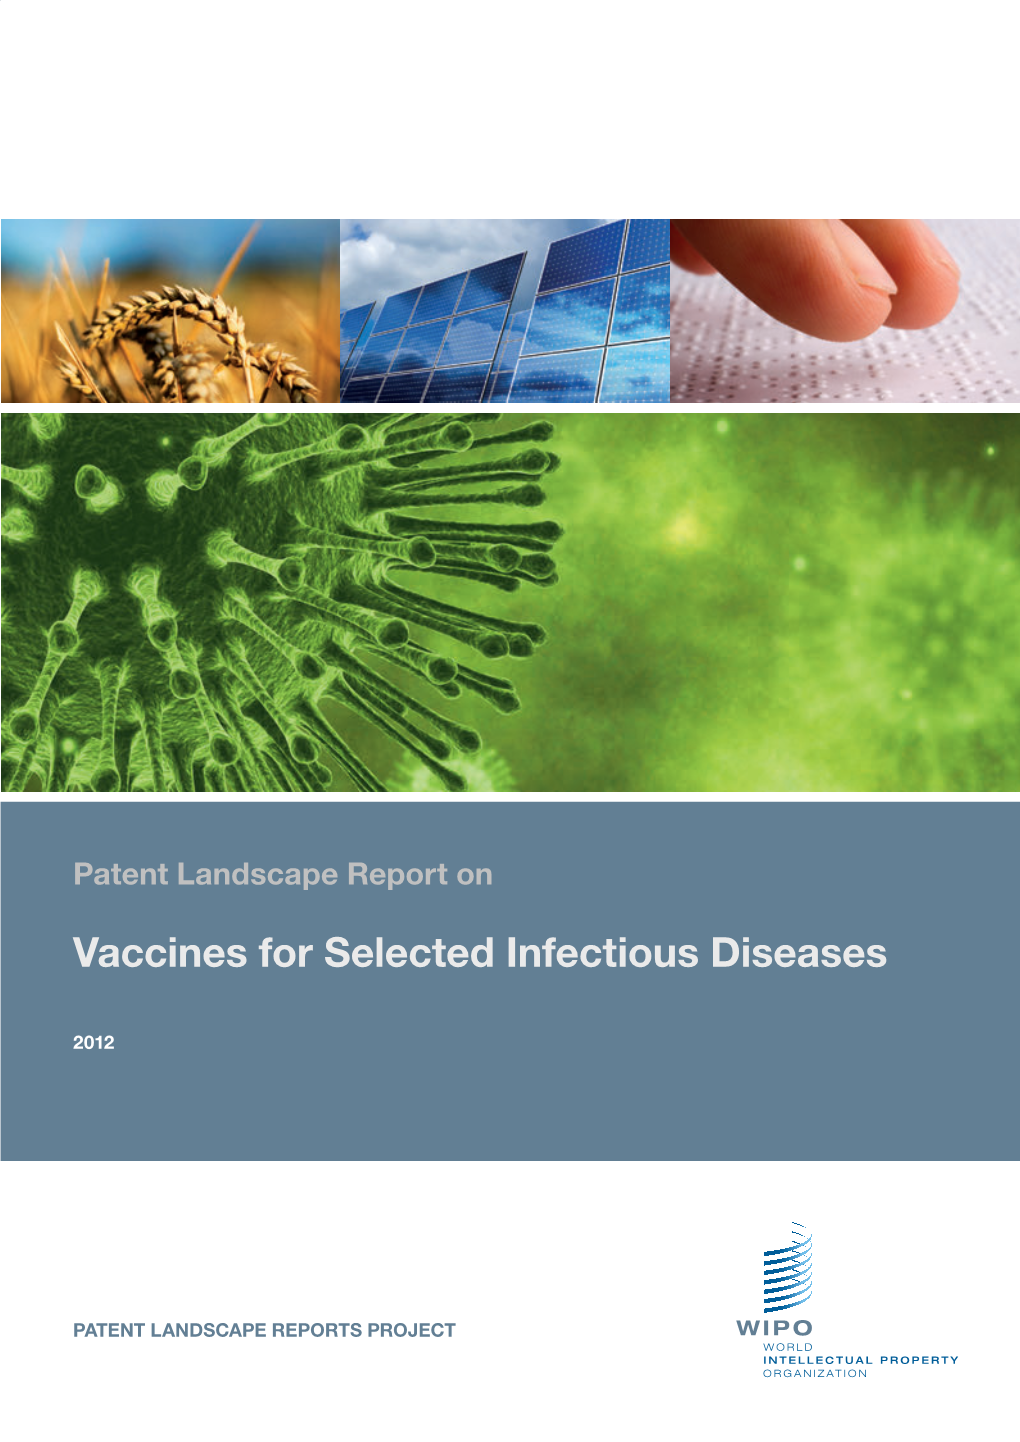 Patent Landscape Report on Vaccines for Selected Infectious Diseases